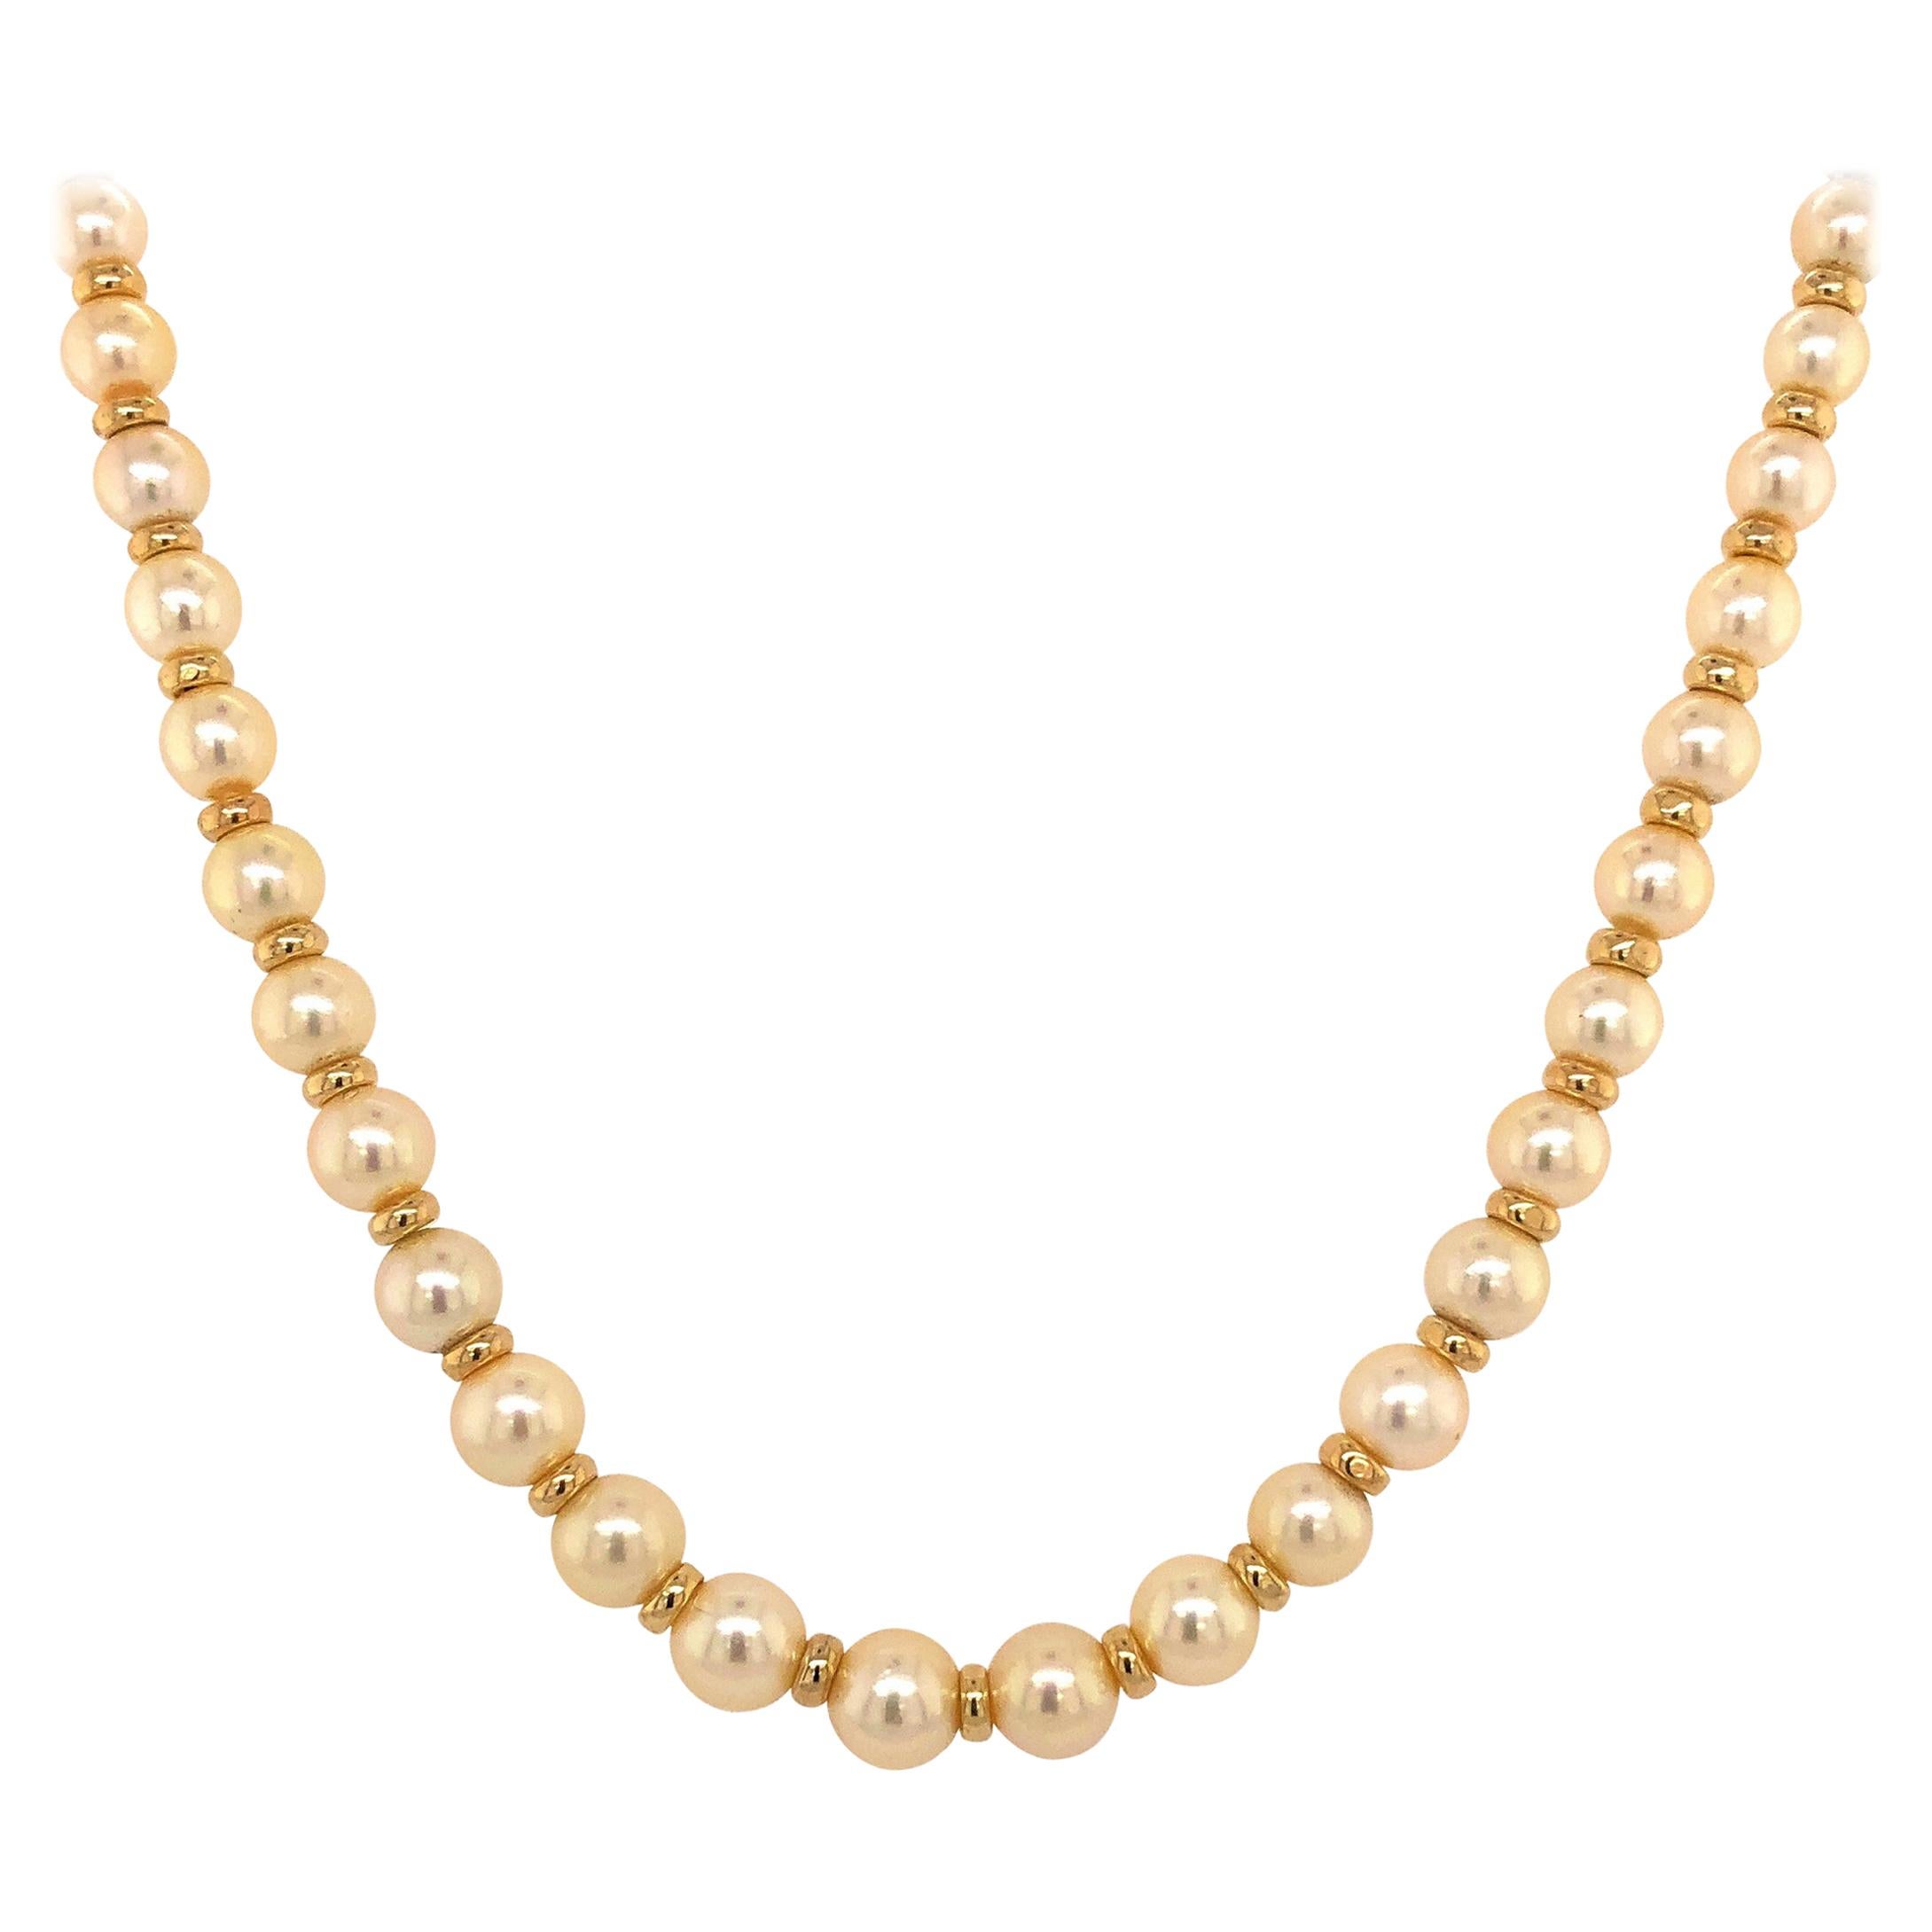 Classic Necklace of Pearls and Gold